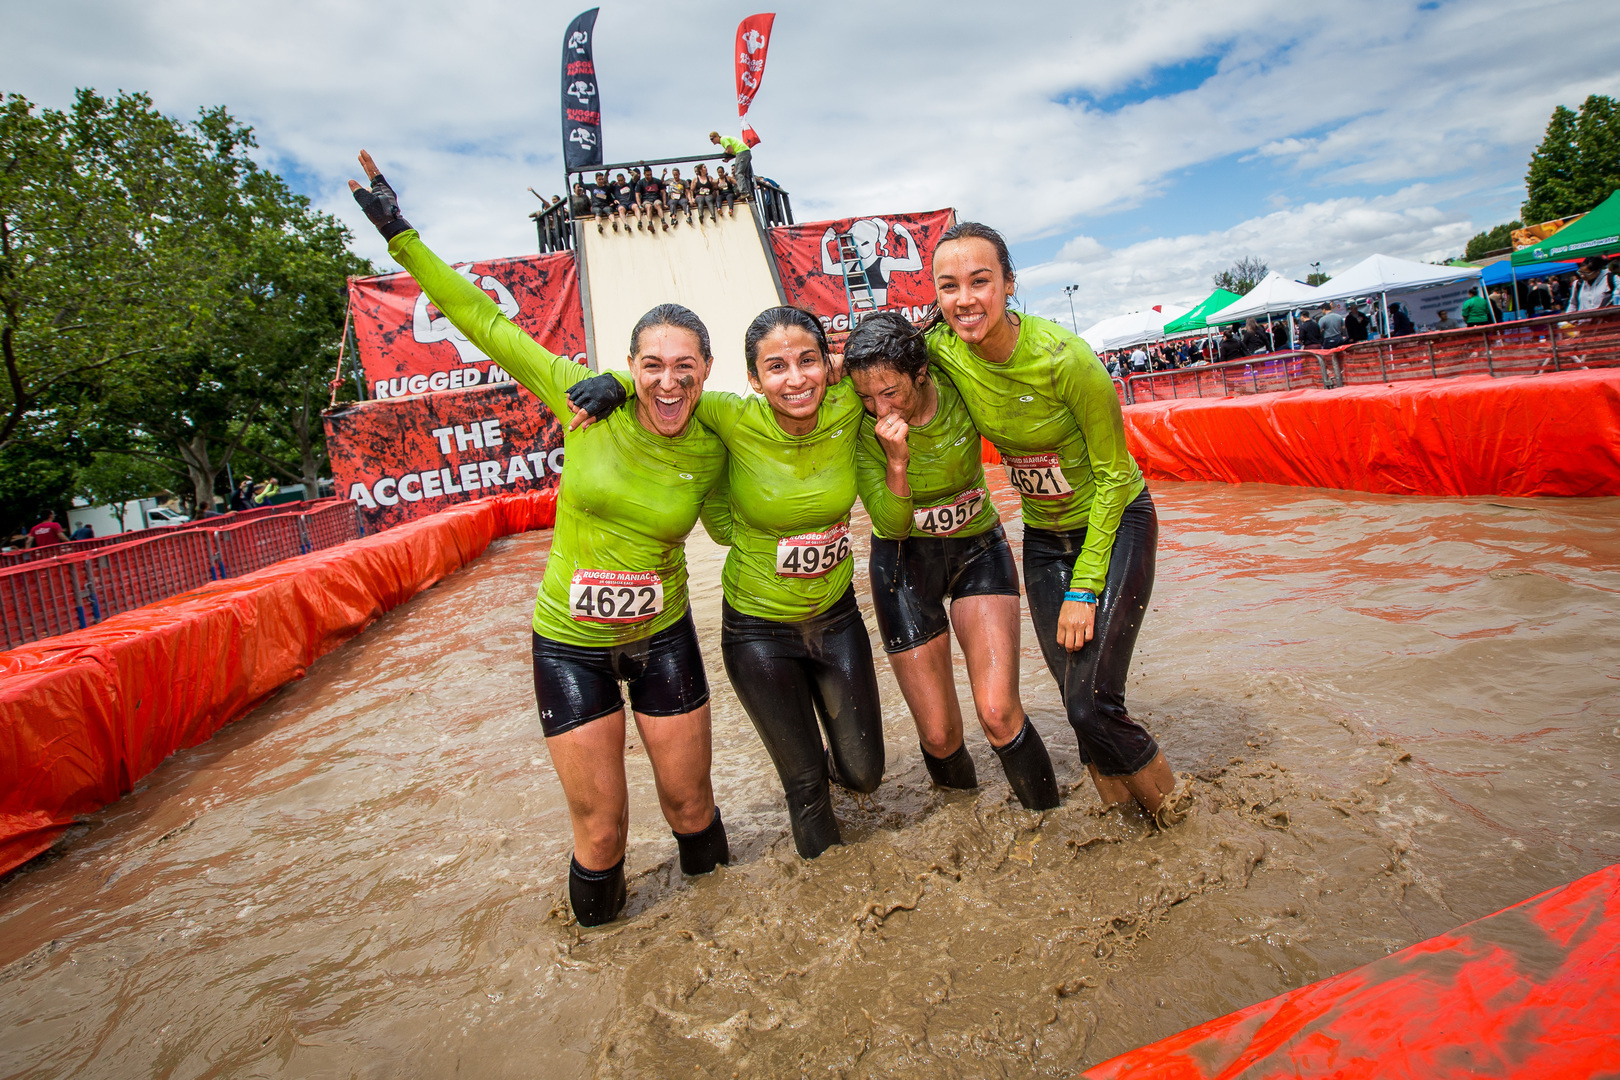 Rugged Maniac 5k Obstacle Race - Southern Indiana, Paoli, Indiana, United States